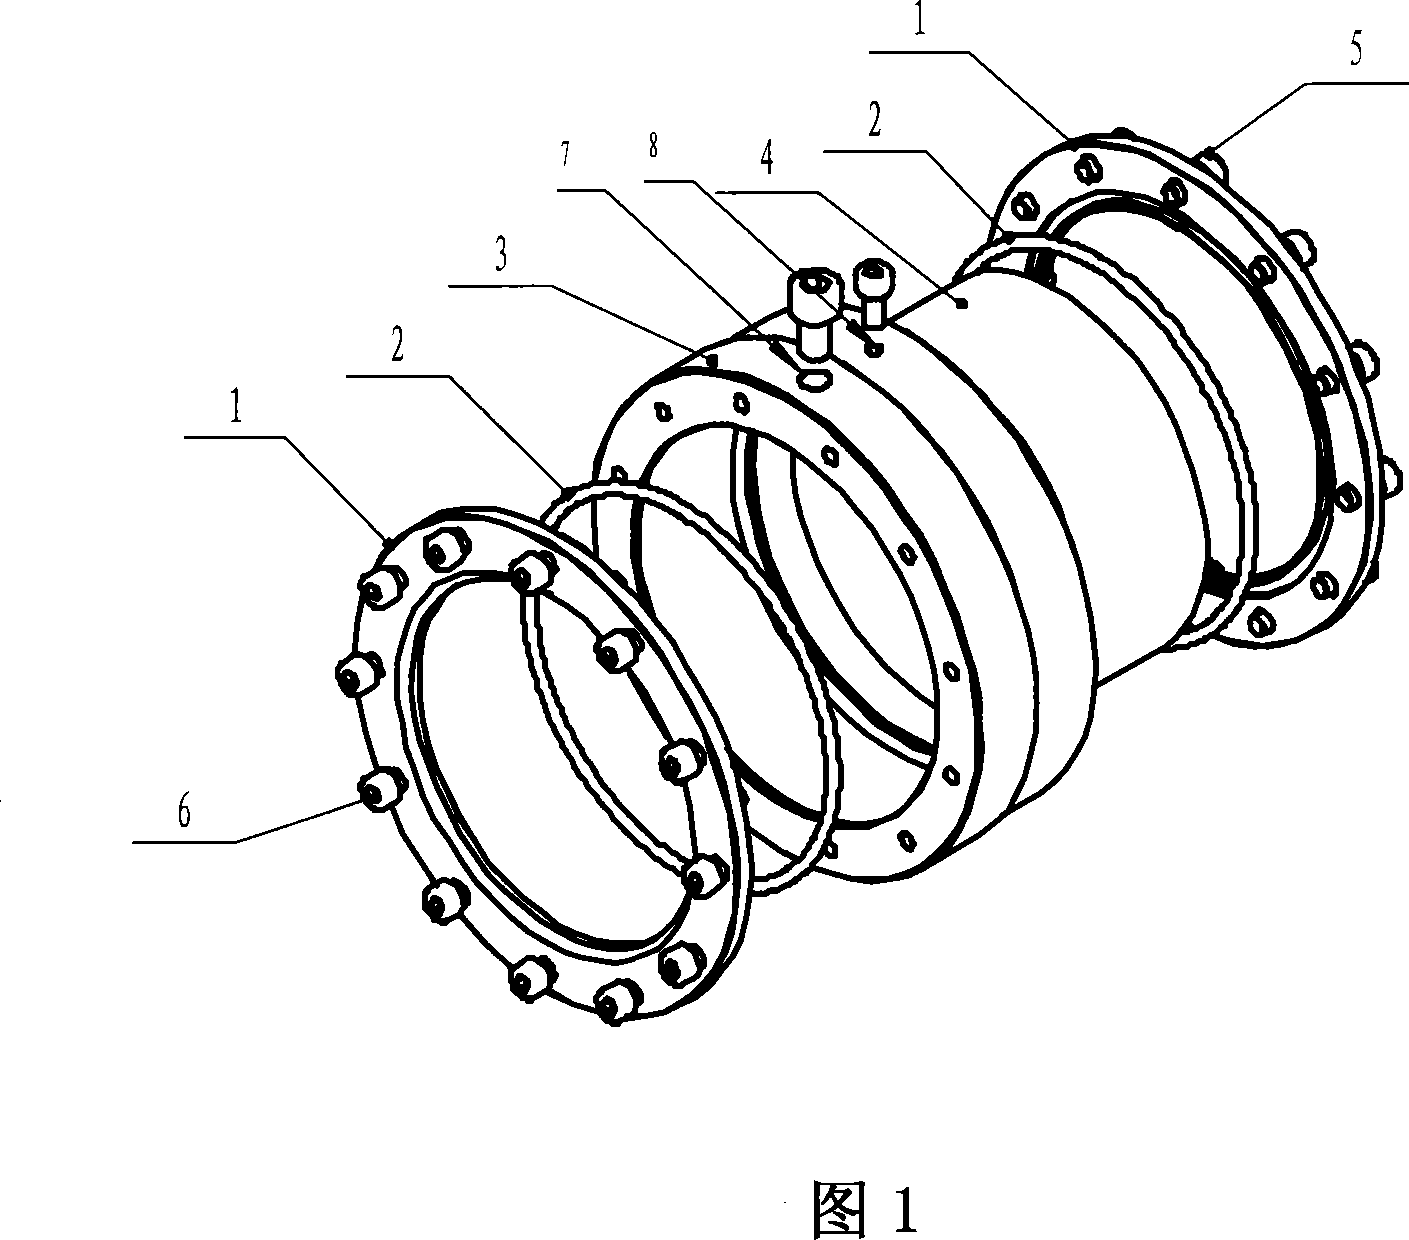 Device and method for restraining the titanium precious stone laser amplifier parasitical surge